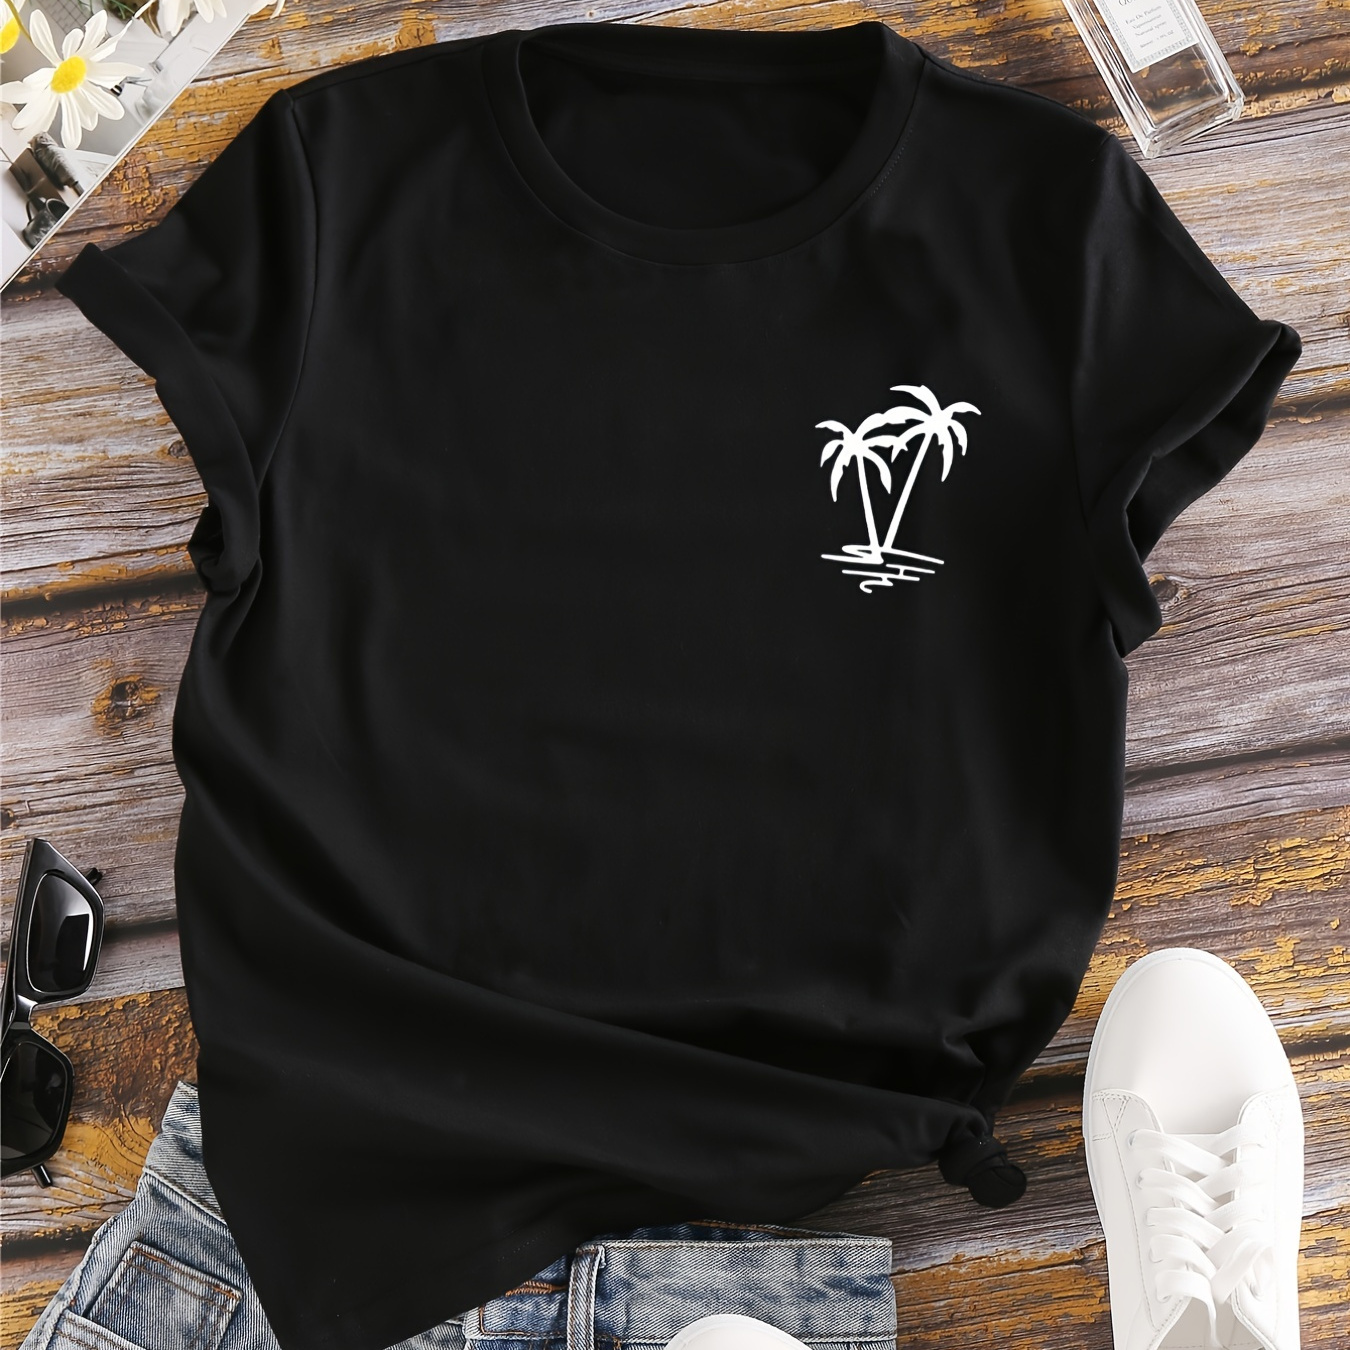 

Coconut Tree Print Crew Neck T-shirt, Casual Loose Short Sleeve Fashion Summer T-shirts Tops, Women's Clothing